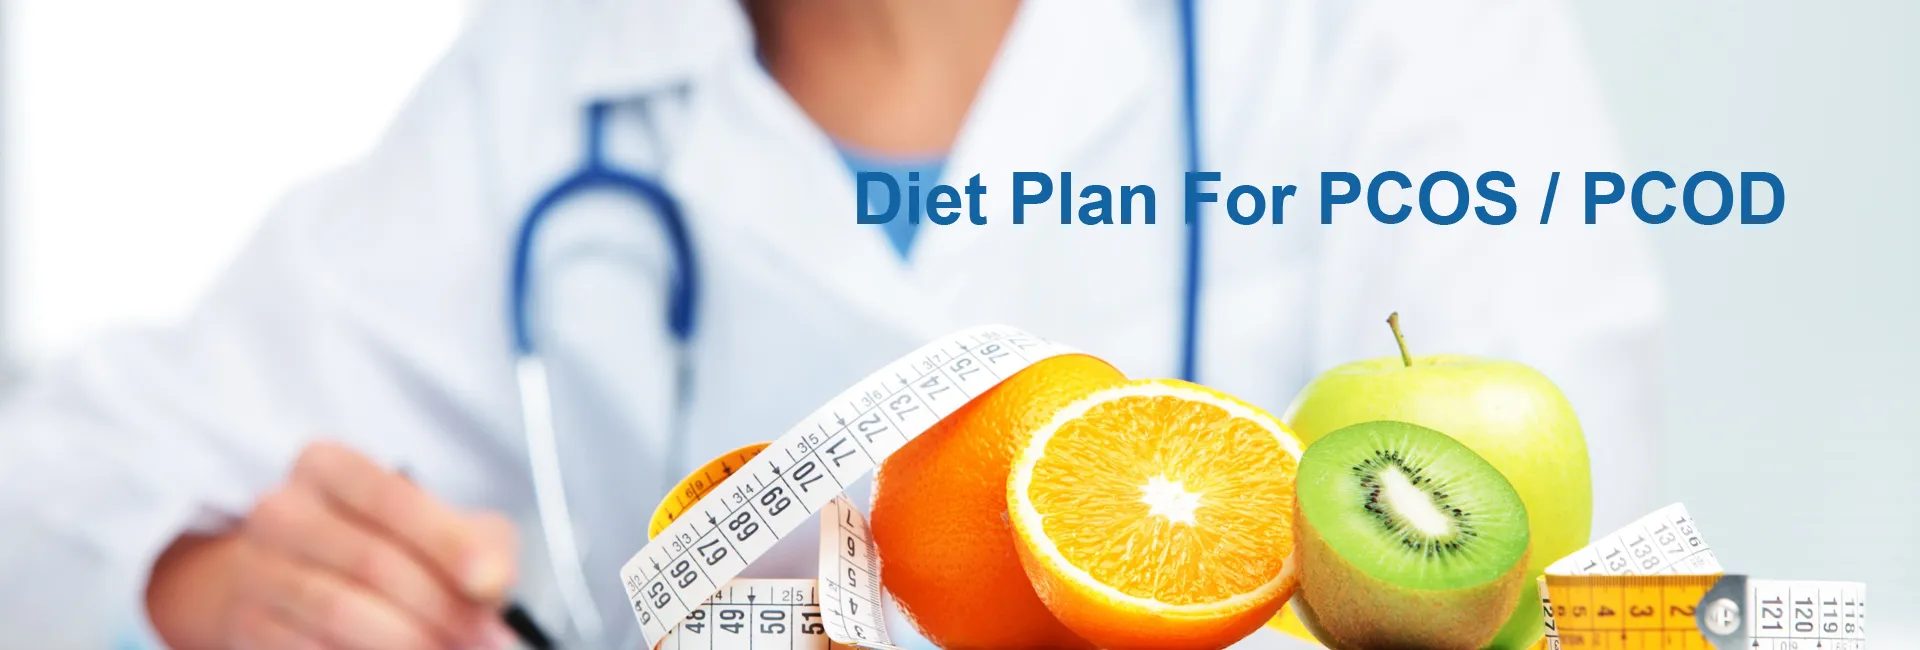 Diet Plan For PCOS / PCOD In Prince George